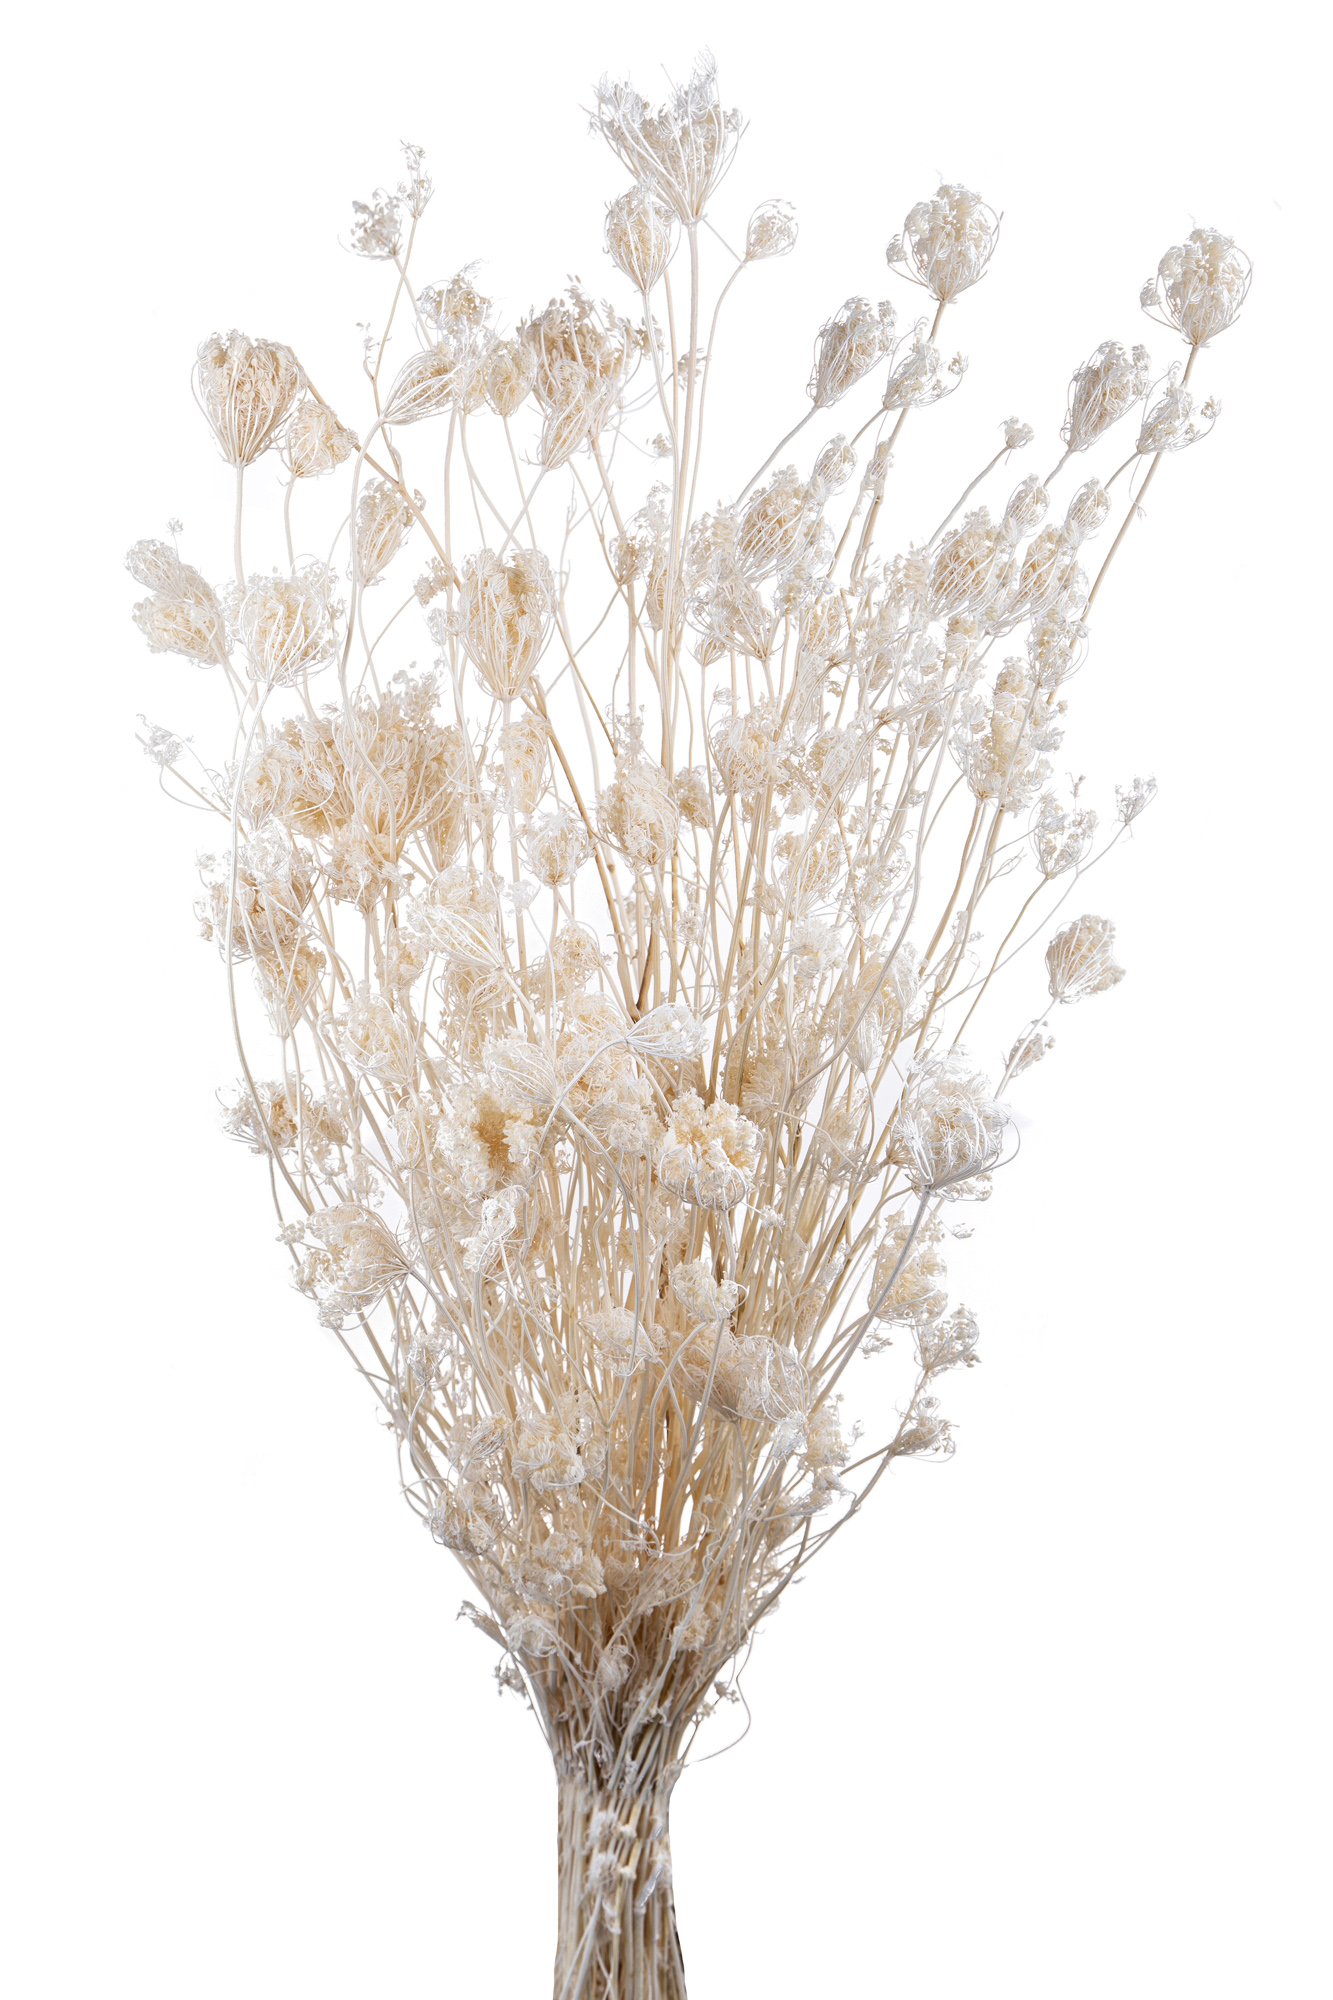 NATURAL PRODUCTS DRIED FLOWERS AND ERBS, COLORED GRASS AND FLOWERS, FINOCCHIO-OMBRELLIFERA SEMI/APER SAC